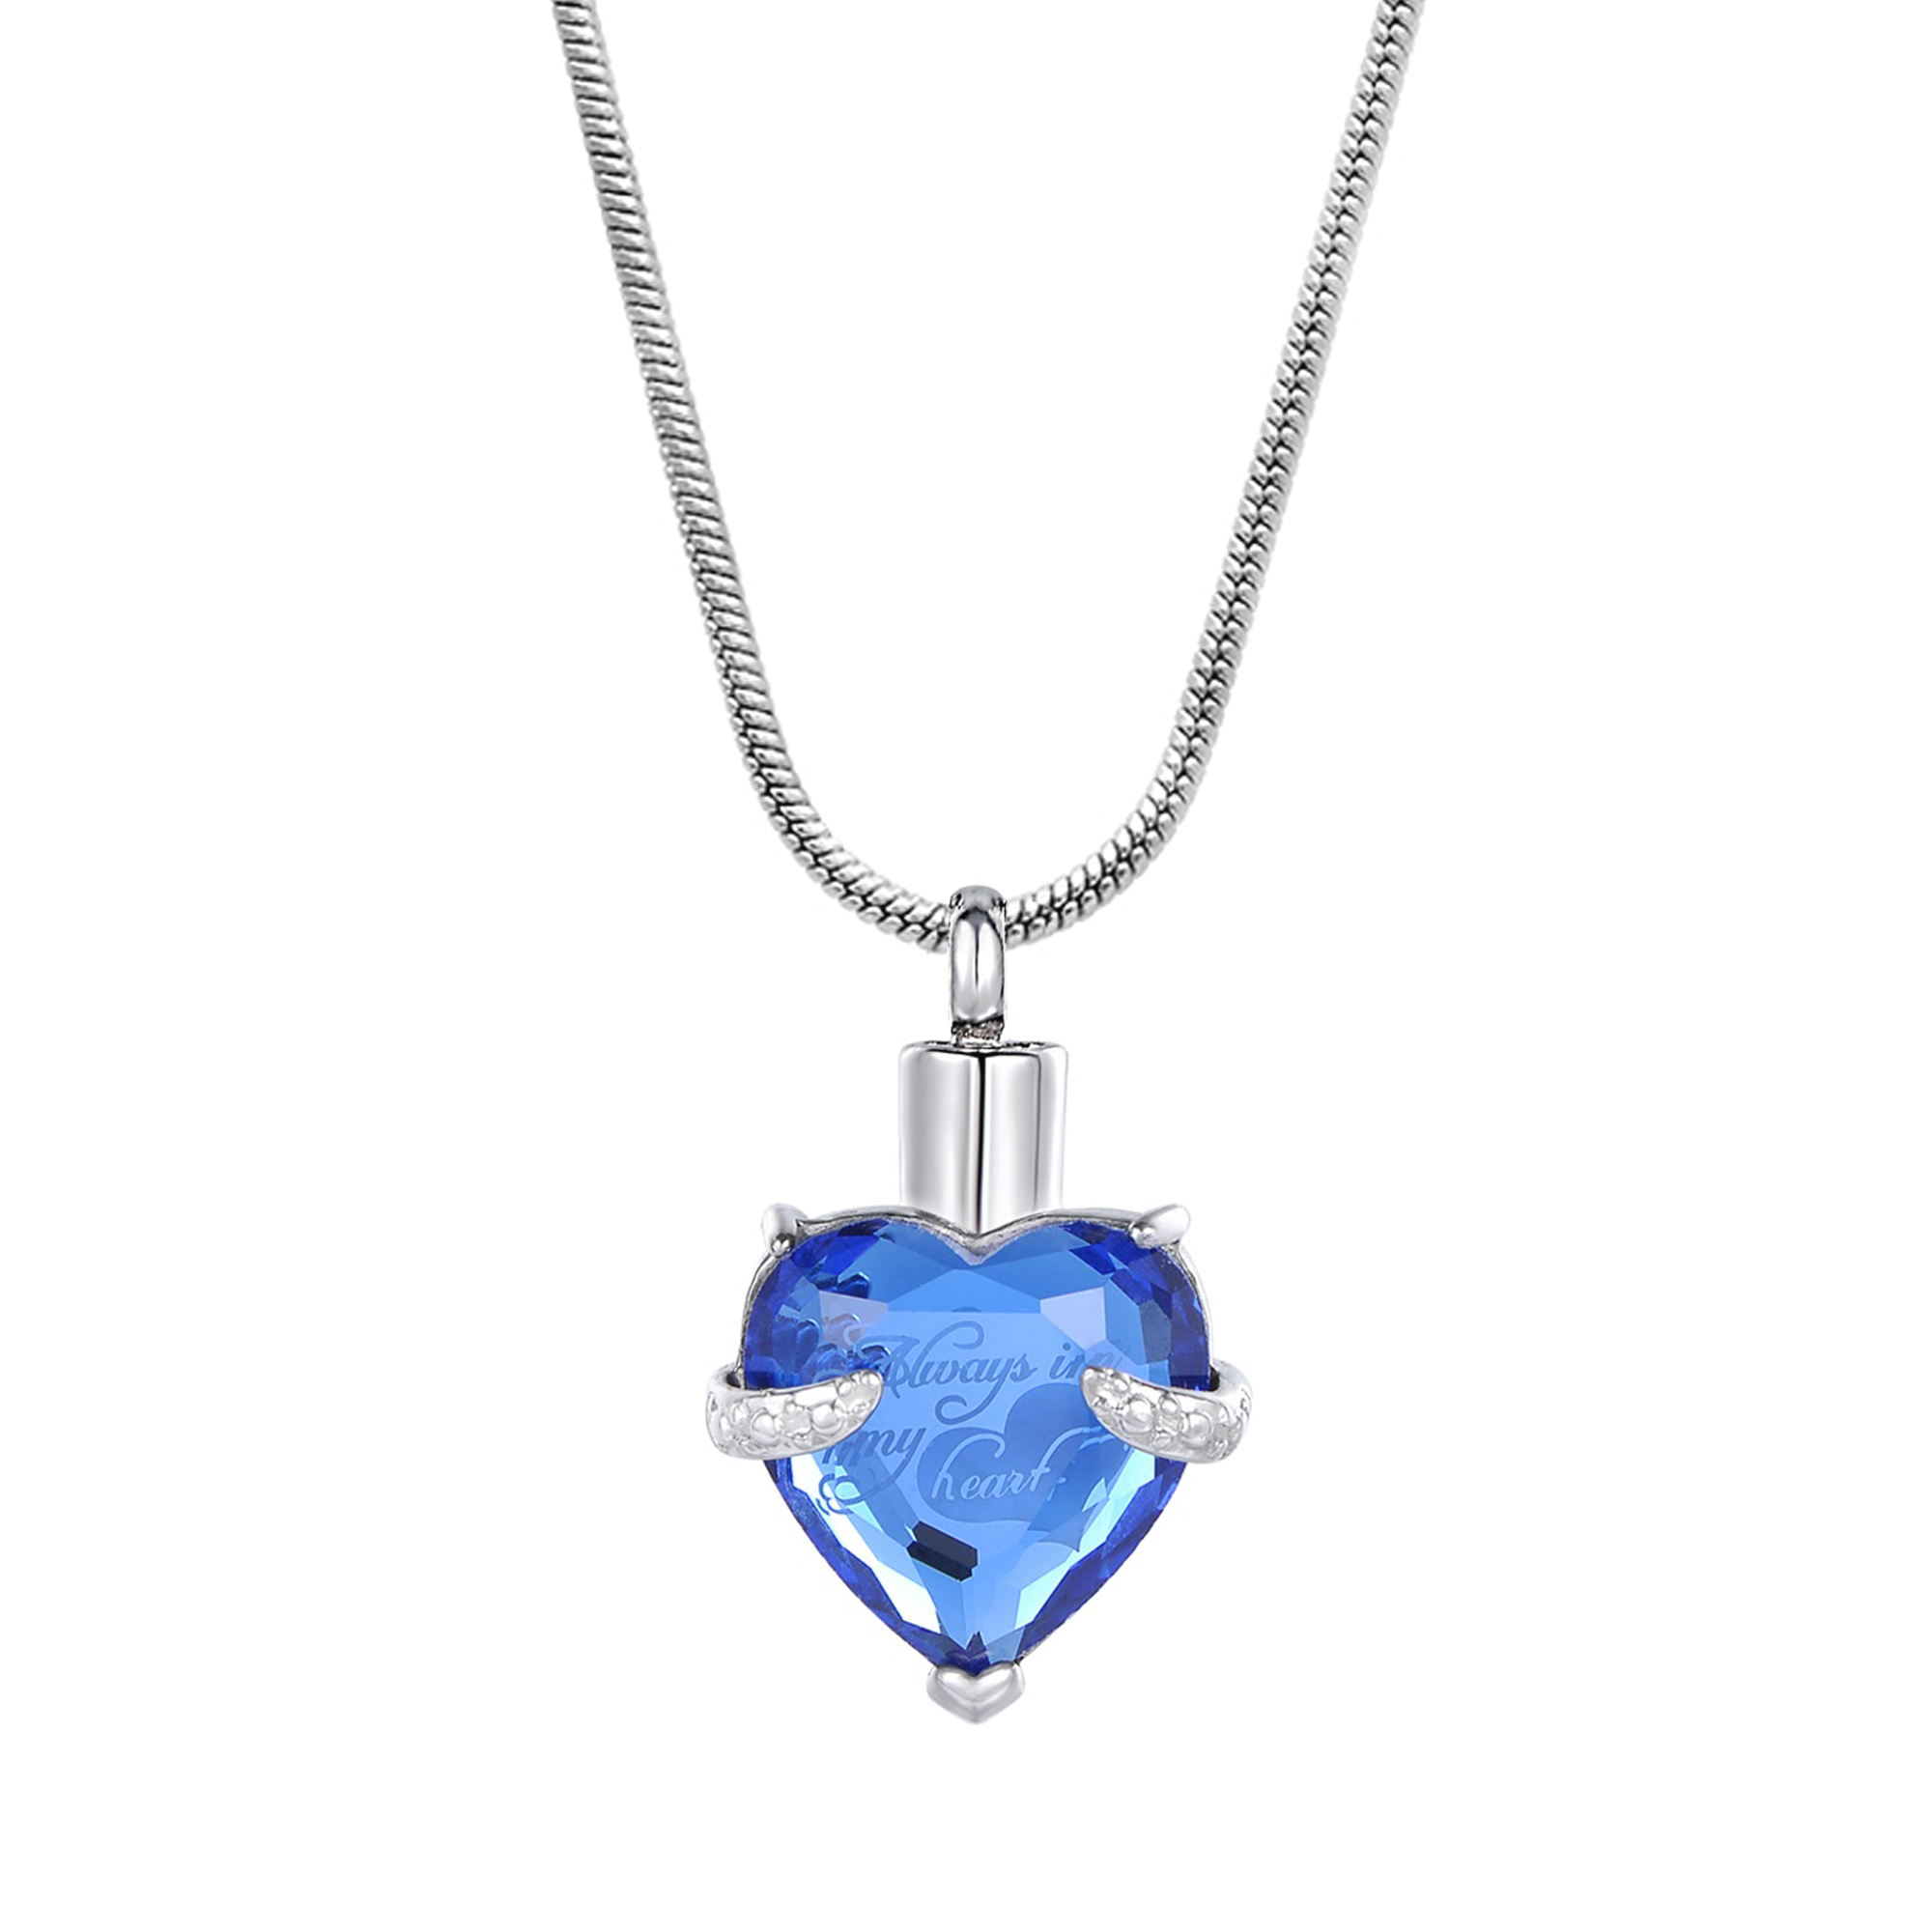 Blue "Always in My Heart" Cremation Necklace Rhinsestone Women's Heart Urn Necklace for Ashes Funeral Urn Jewelry Remembrance Memorial Pendant with Free Funnel Fill Kit and Gift Box - image 1 of 10